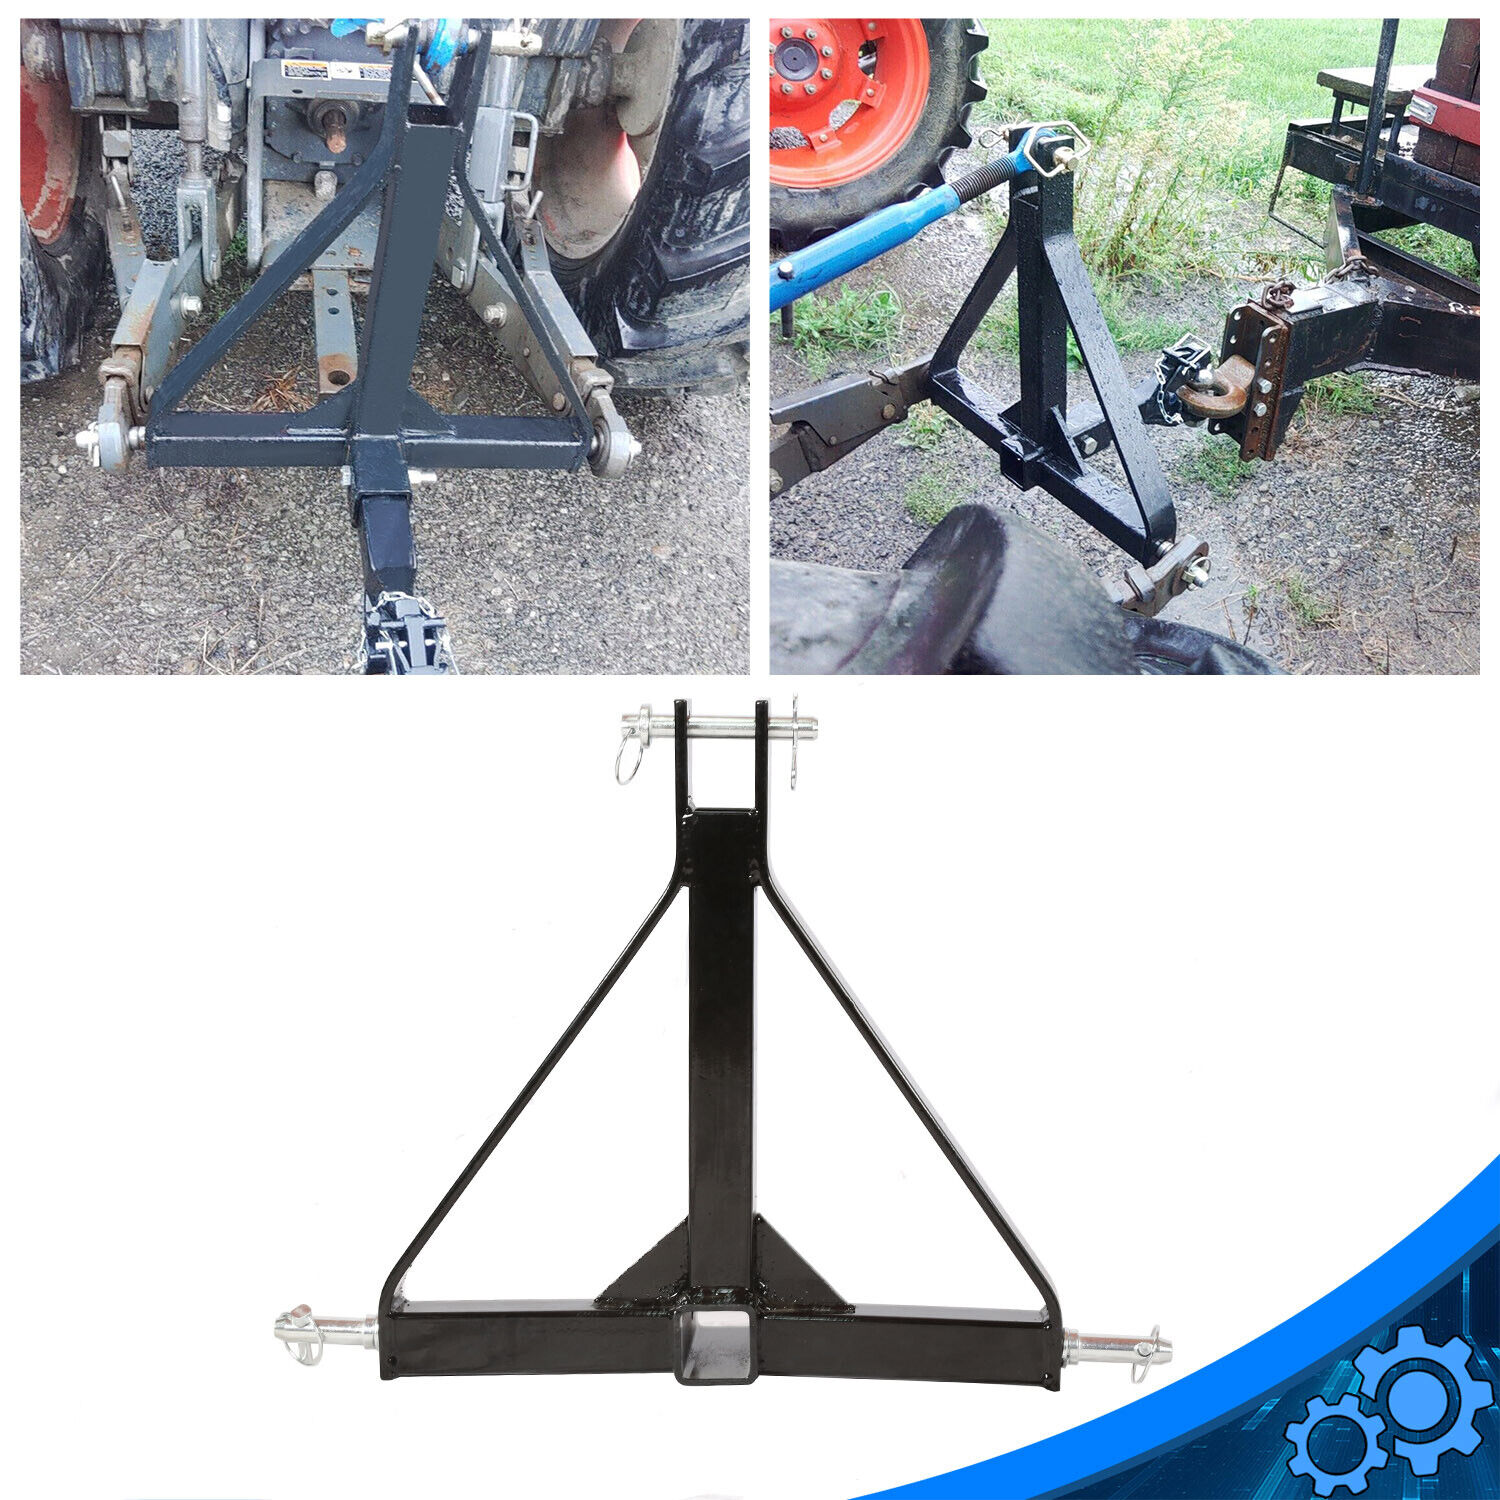 3 Point 2“ Receiver Trailer Hitch Category One Tractor Tow Hitch Drawbar Adapter